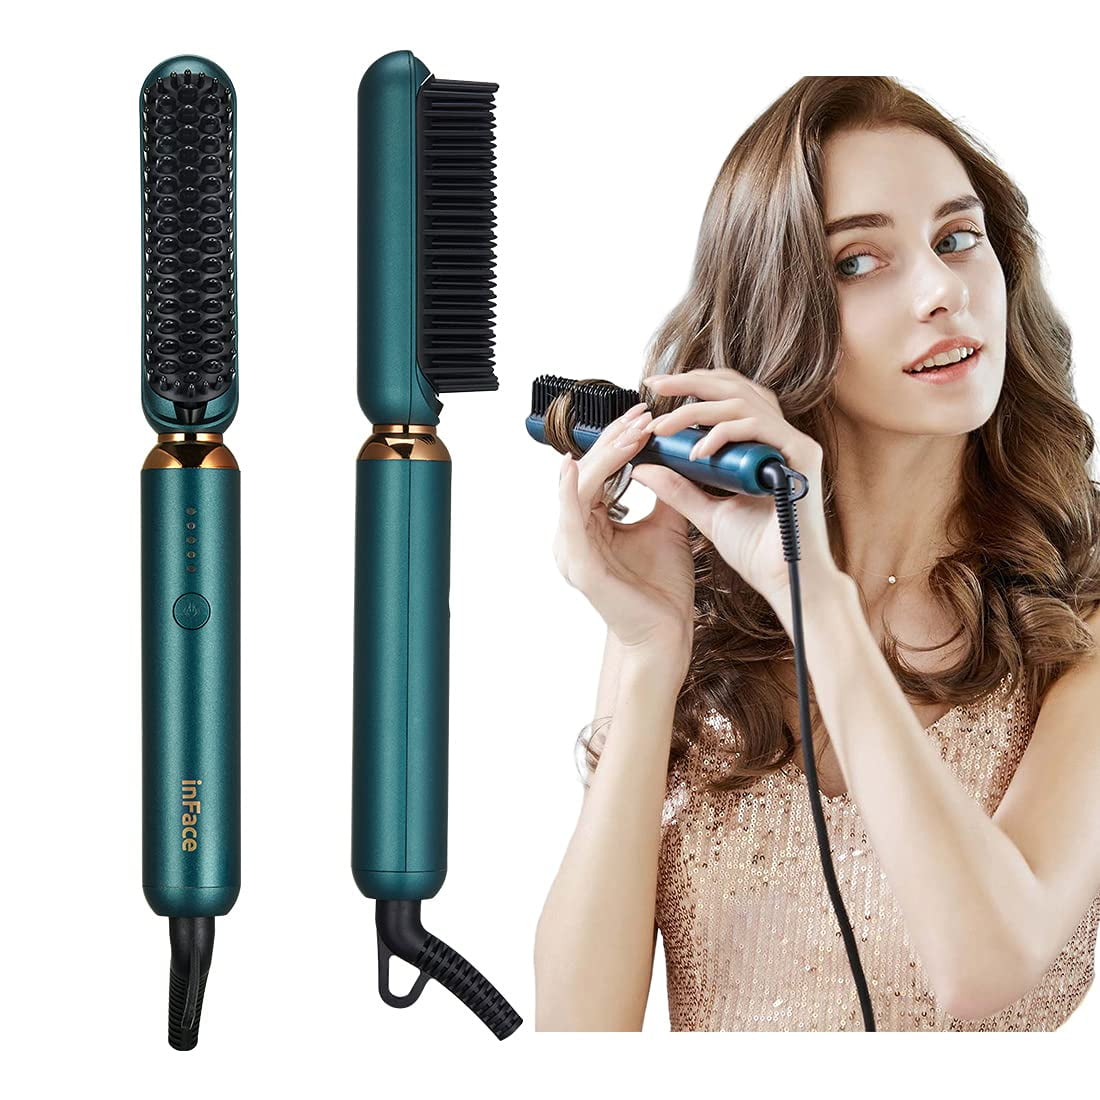 Hair Straightener Brush by inFace, 20s Fast MCH Ceramic Heating Hair  Straightening Brush with Anti Scald Feature, 5 Temp Settings & Anti-Scald,  30 Mins Auto-off, Perfect for Professional Salon at Home |